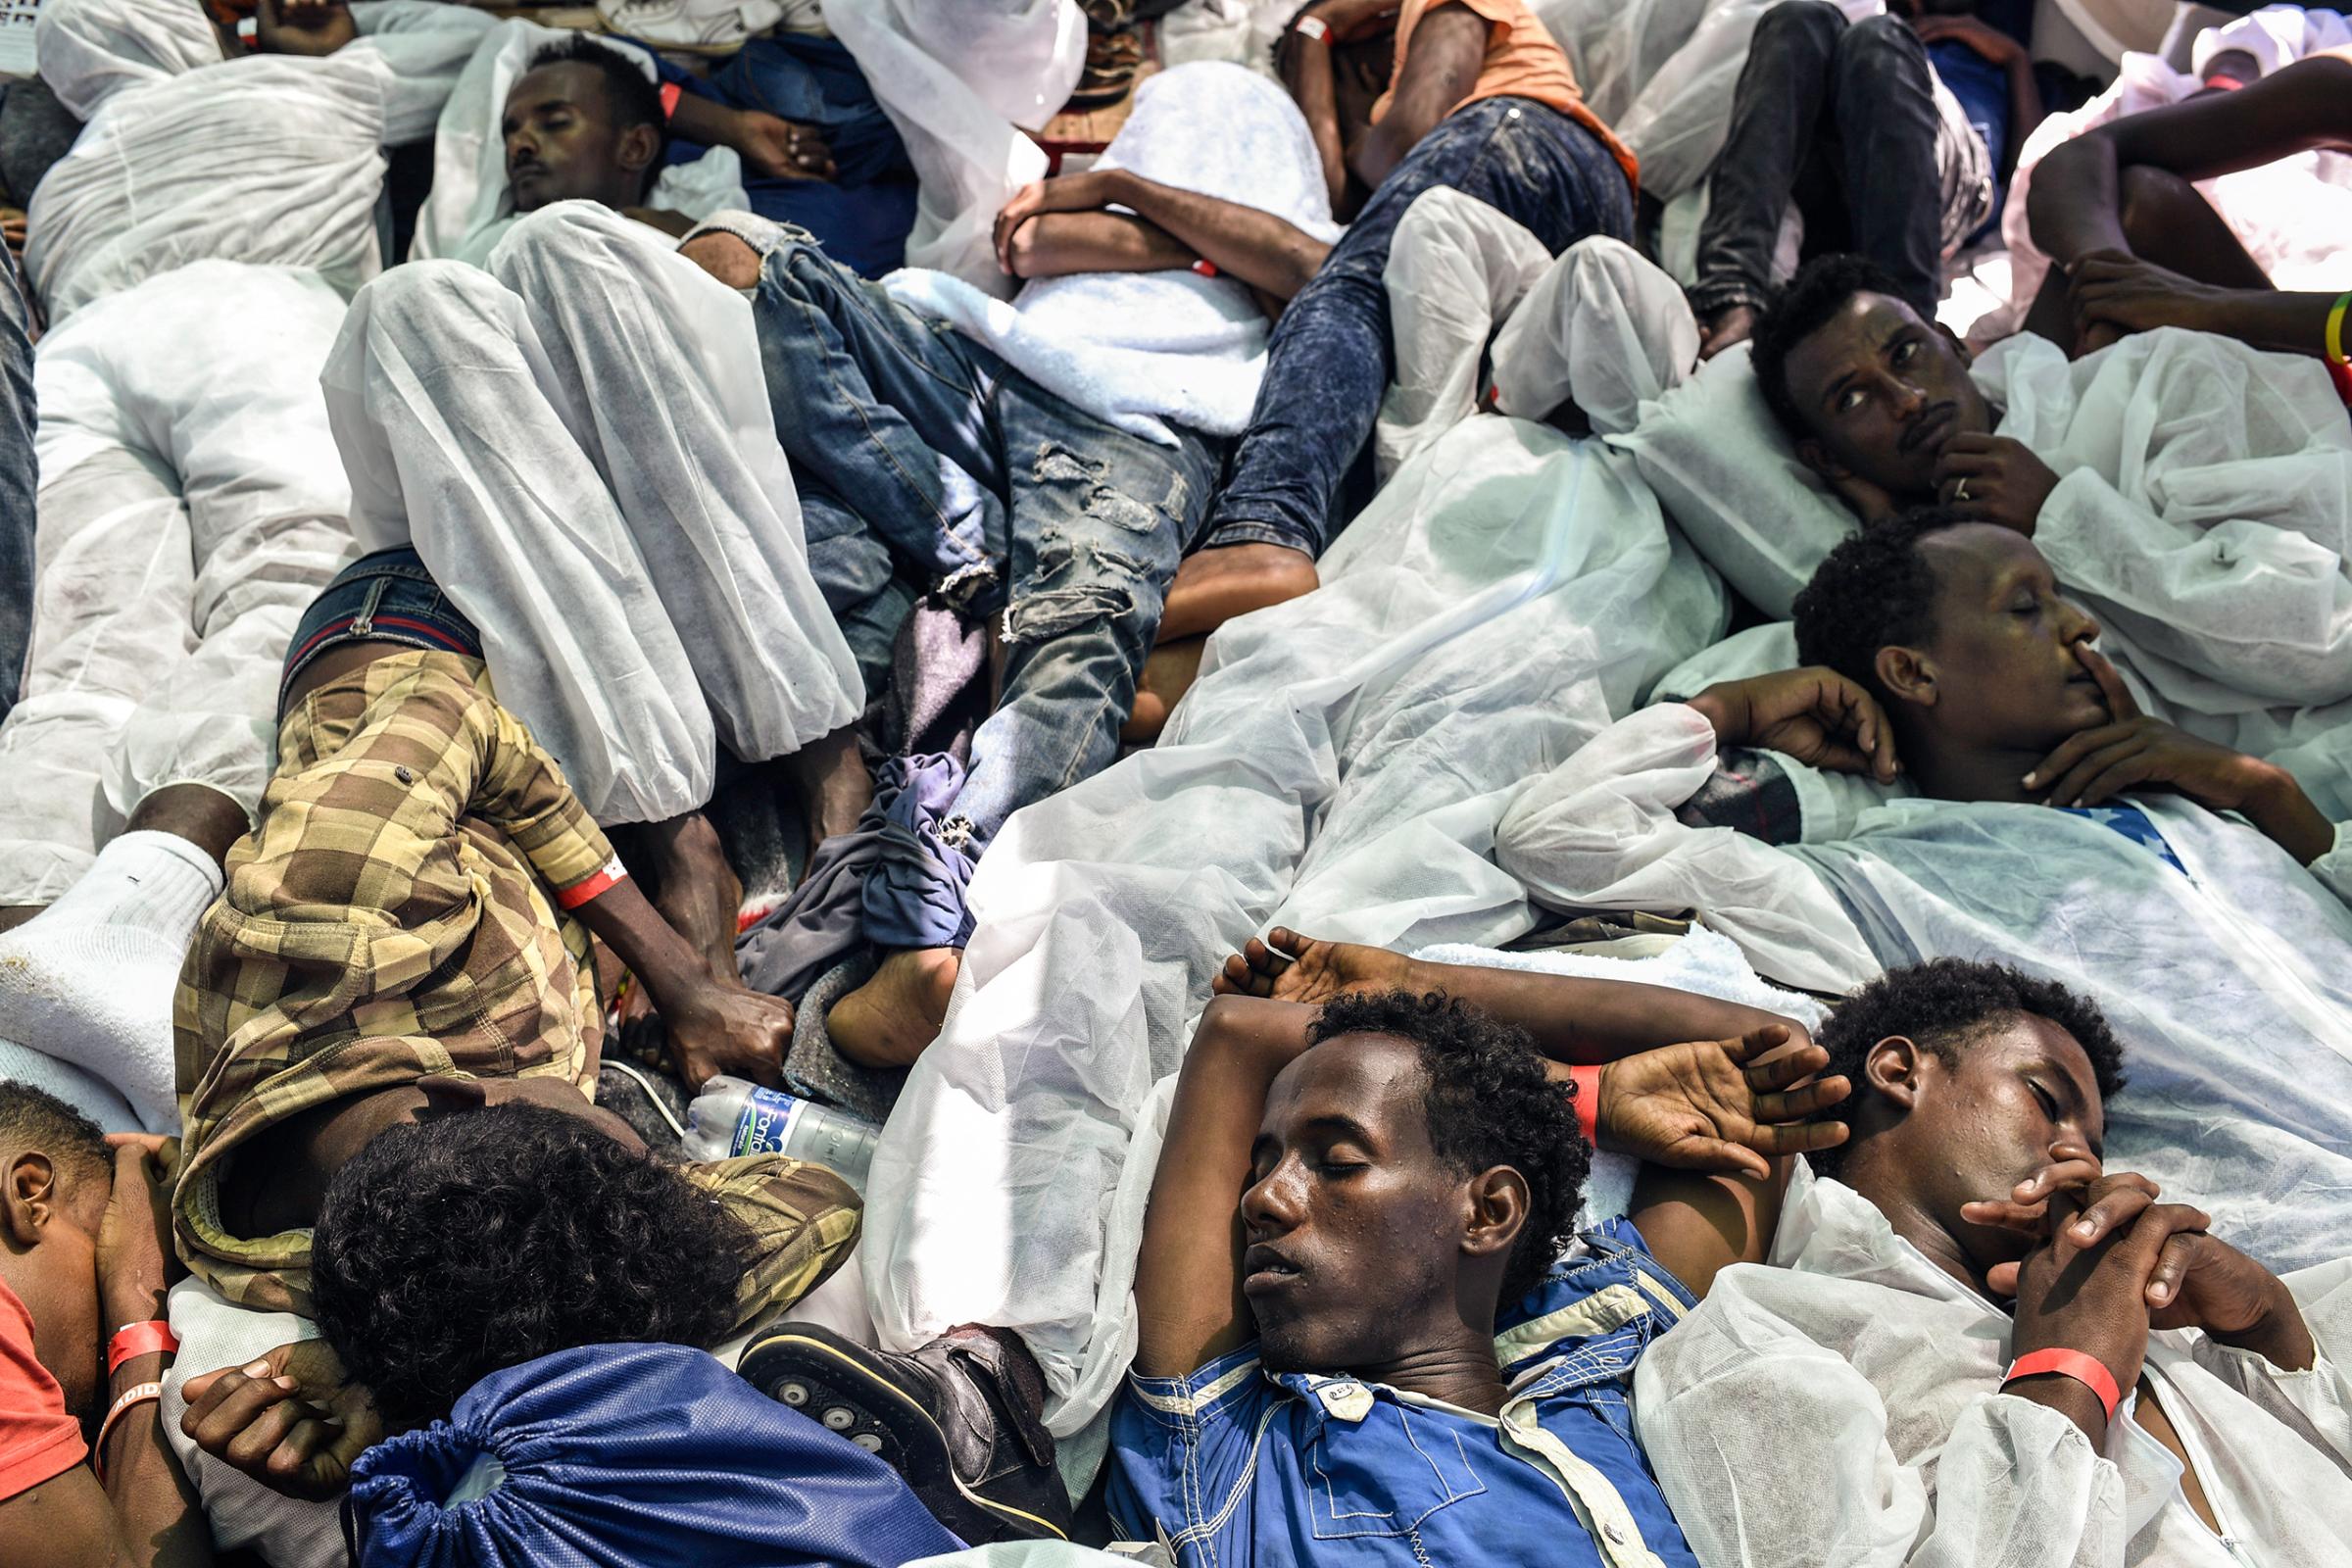 A group of men sleep on MV Aquarius ship after being rescued by search-and-rescue teams jointly operated by Médecins Sans Frontières and SOS Méditerranée, Aug. 21, 2016.